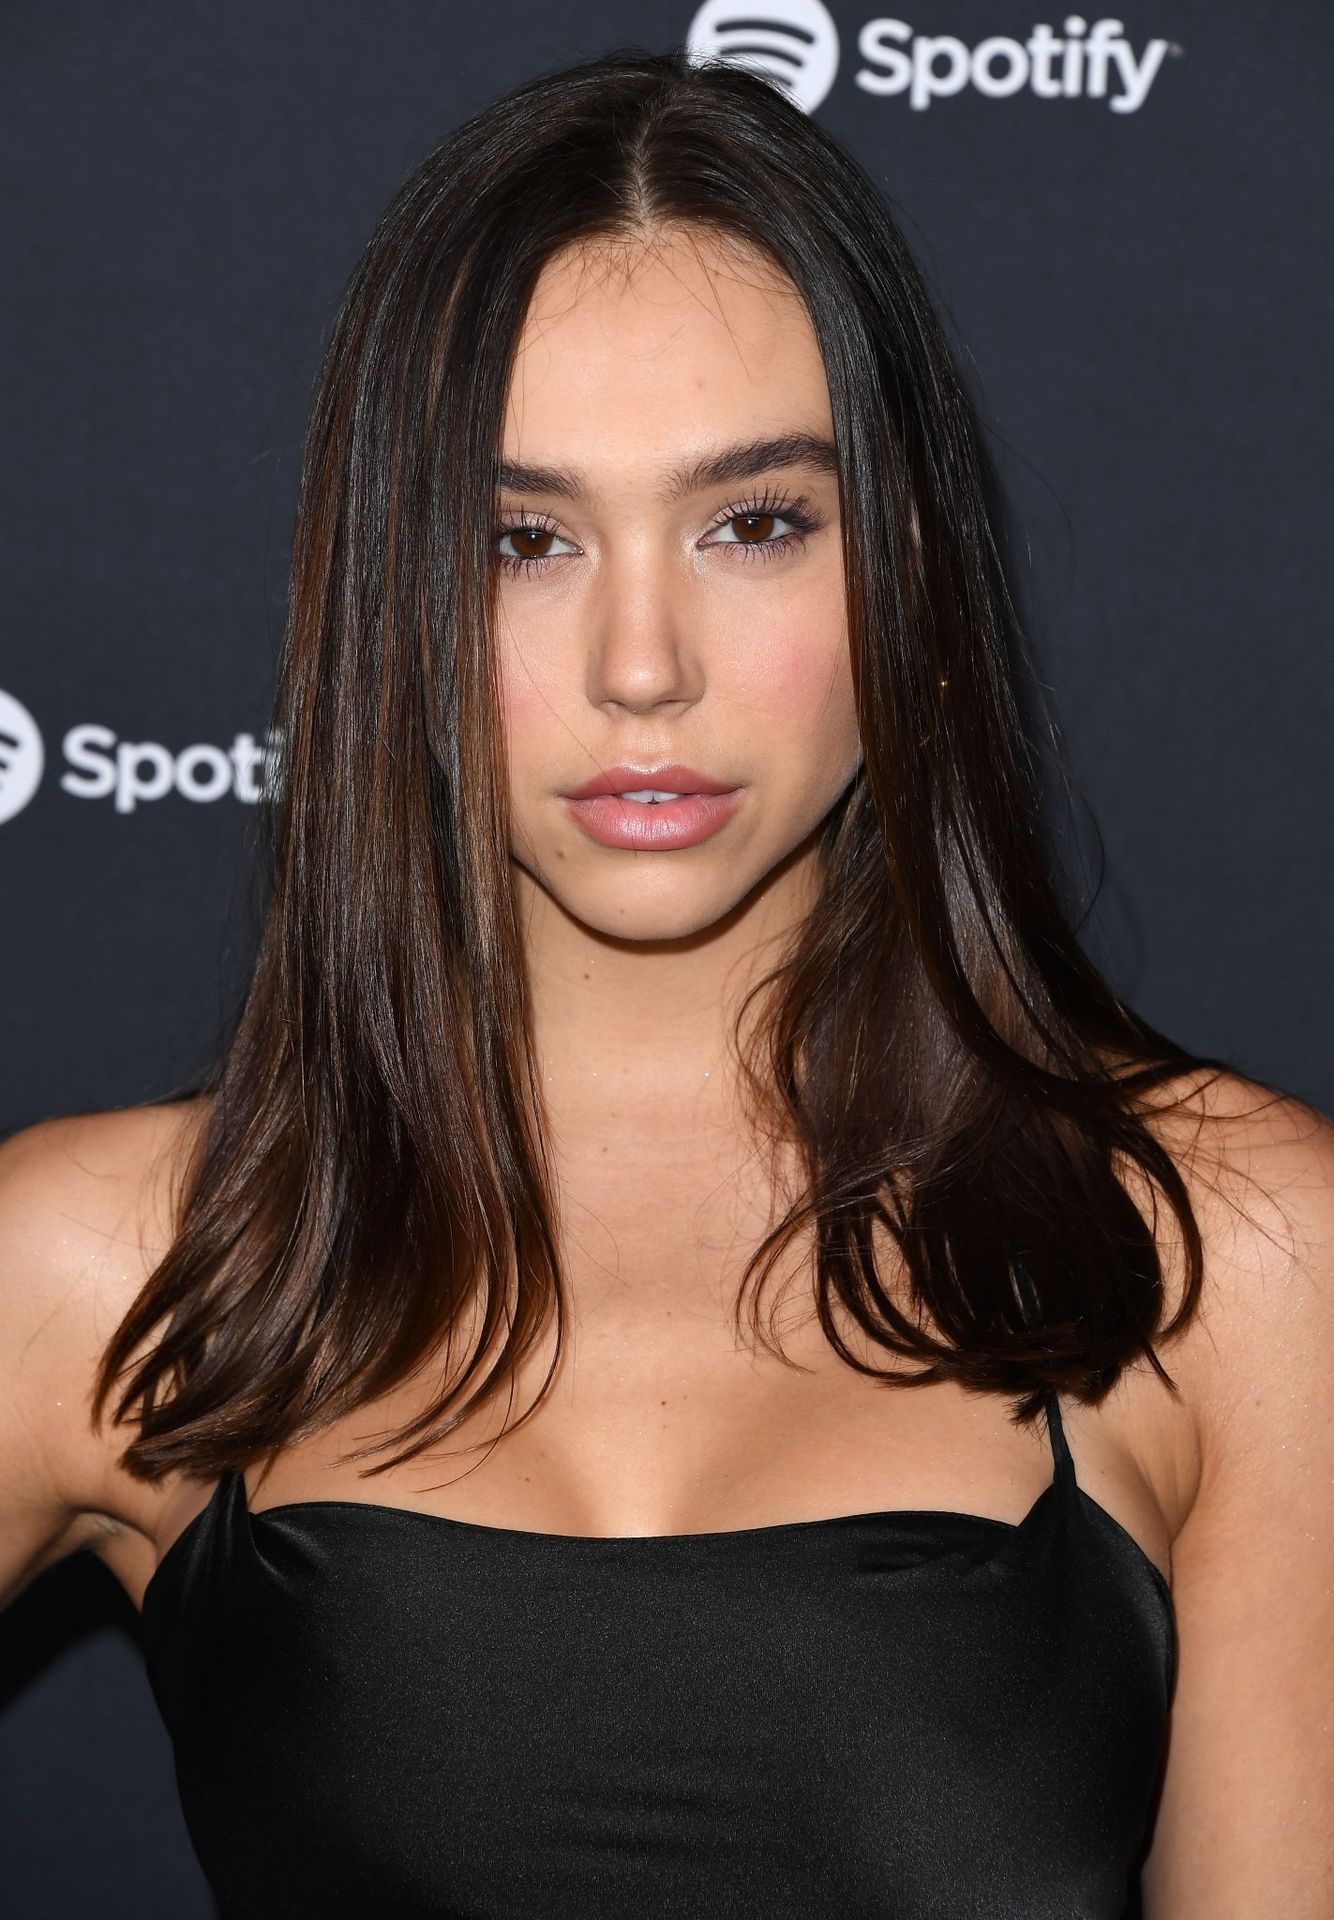 Alexis Ren Shows Off Her Tits At The Spotify Best New Artist Party 0001